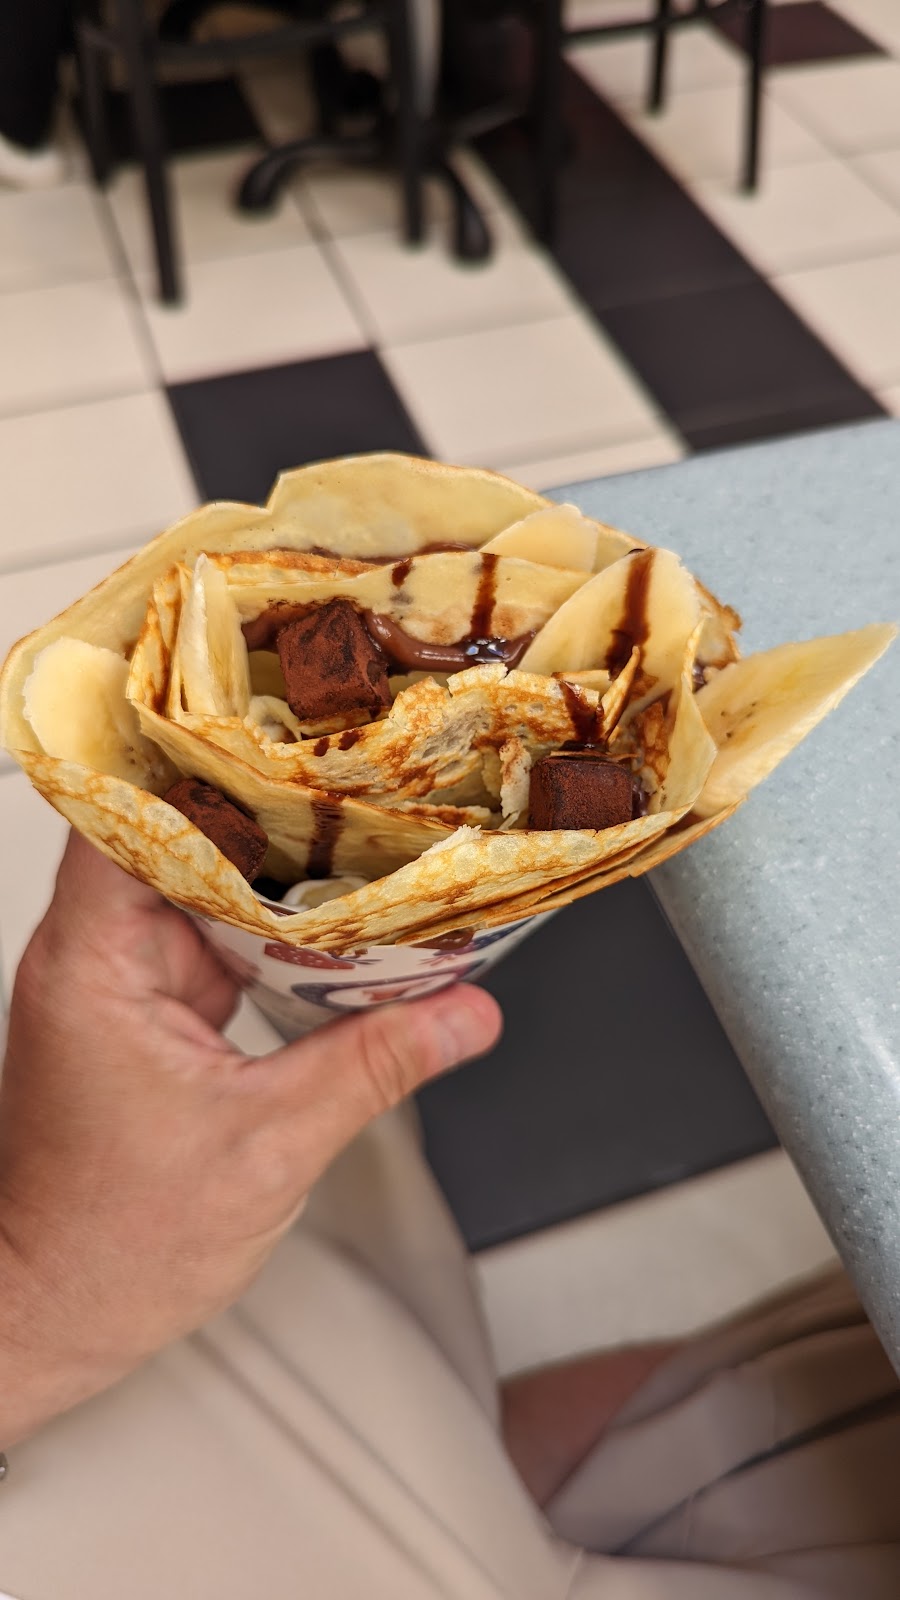 T swirl crepe | Mall food court, 1365 N Dupont Hwy Suite 3044, Dover, DE 19901 | Phone: (302) 883-2797